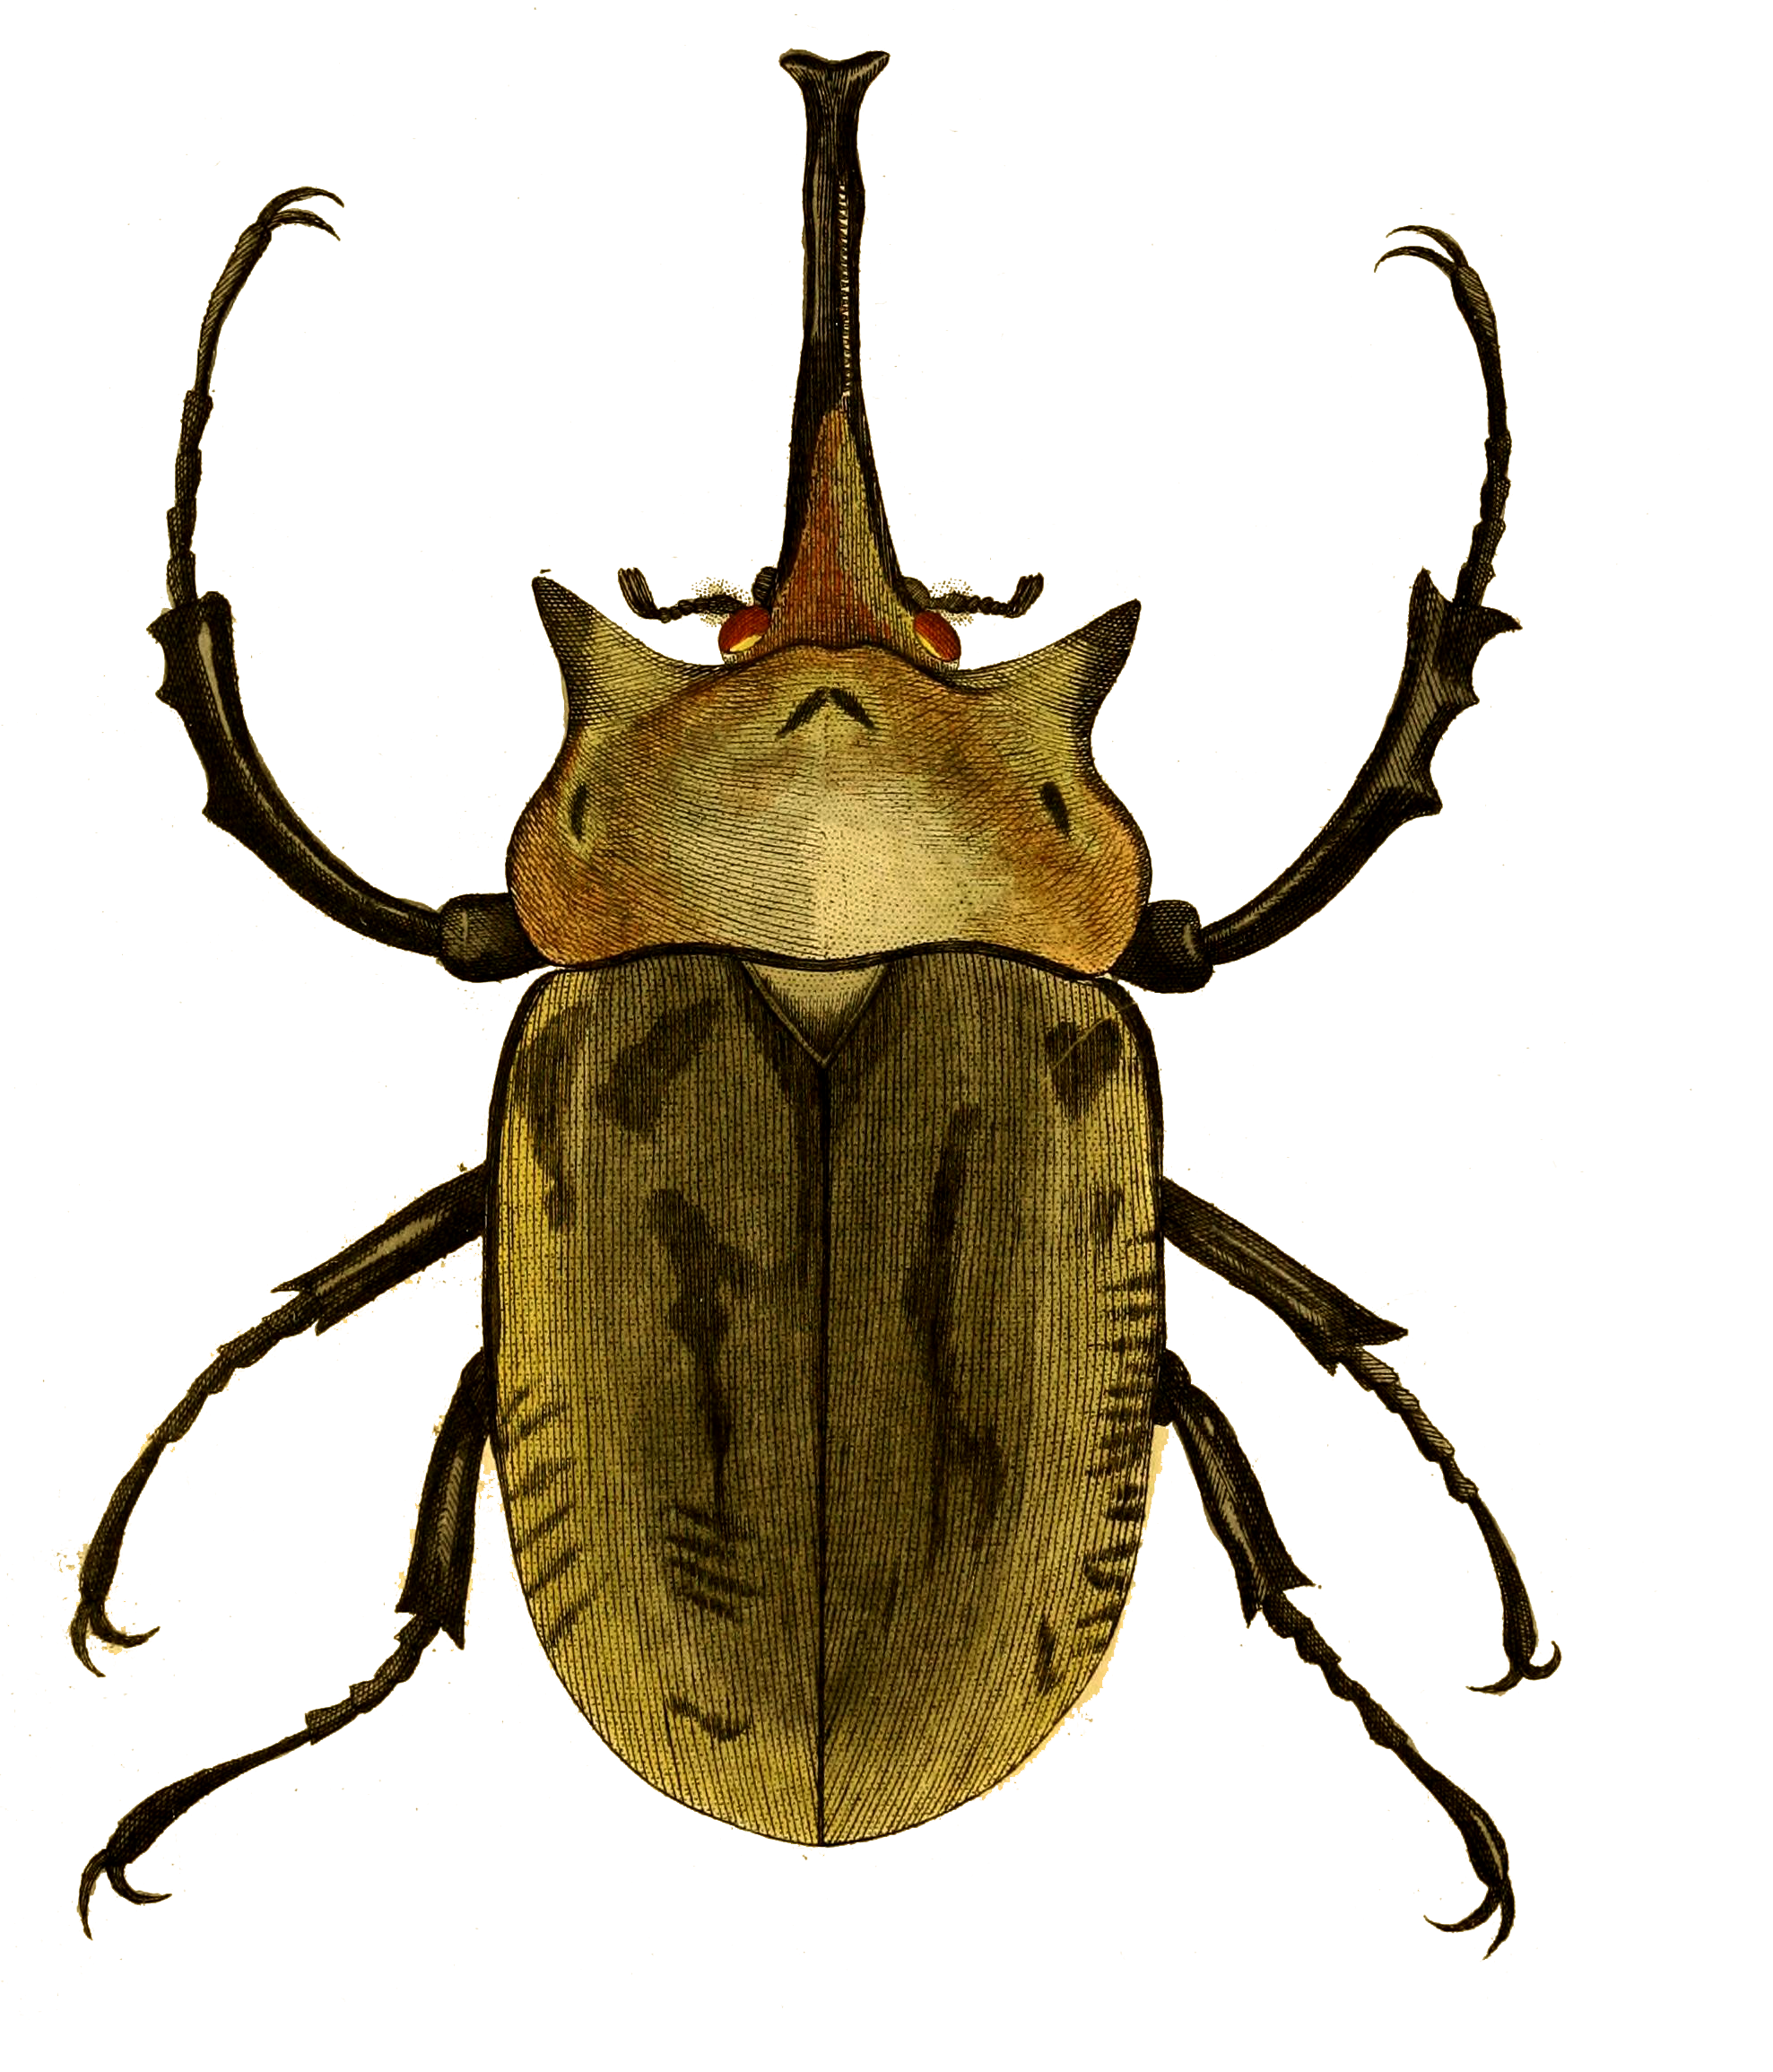 A vintage-style drawing of a beetle.